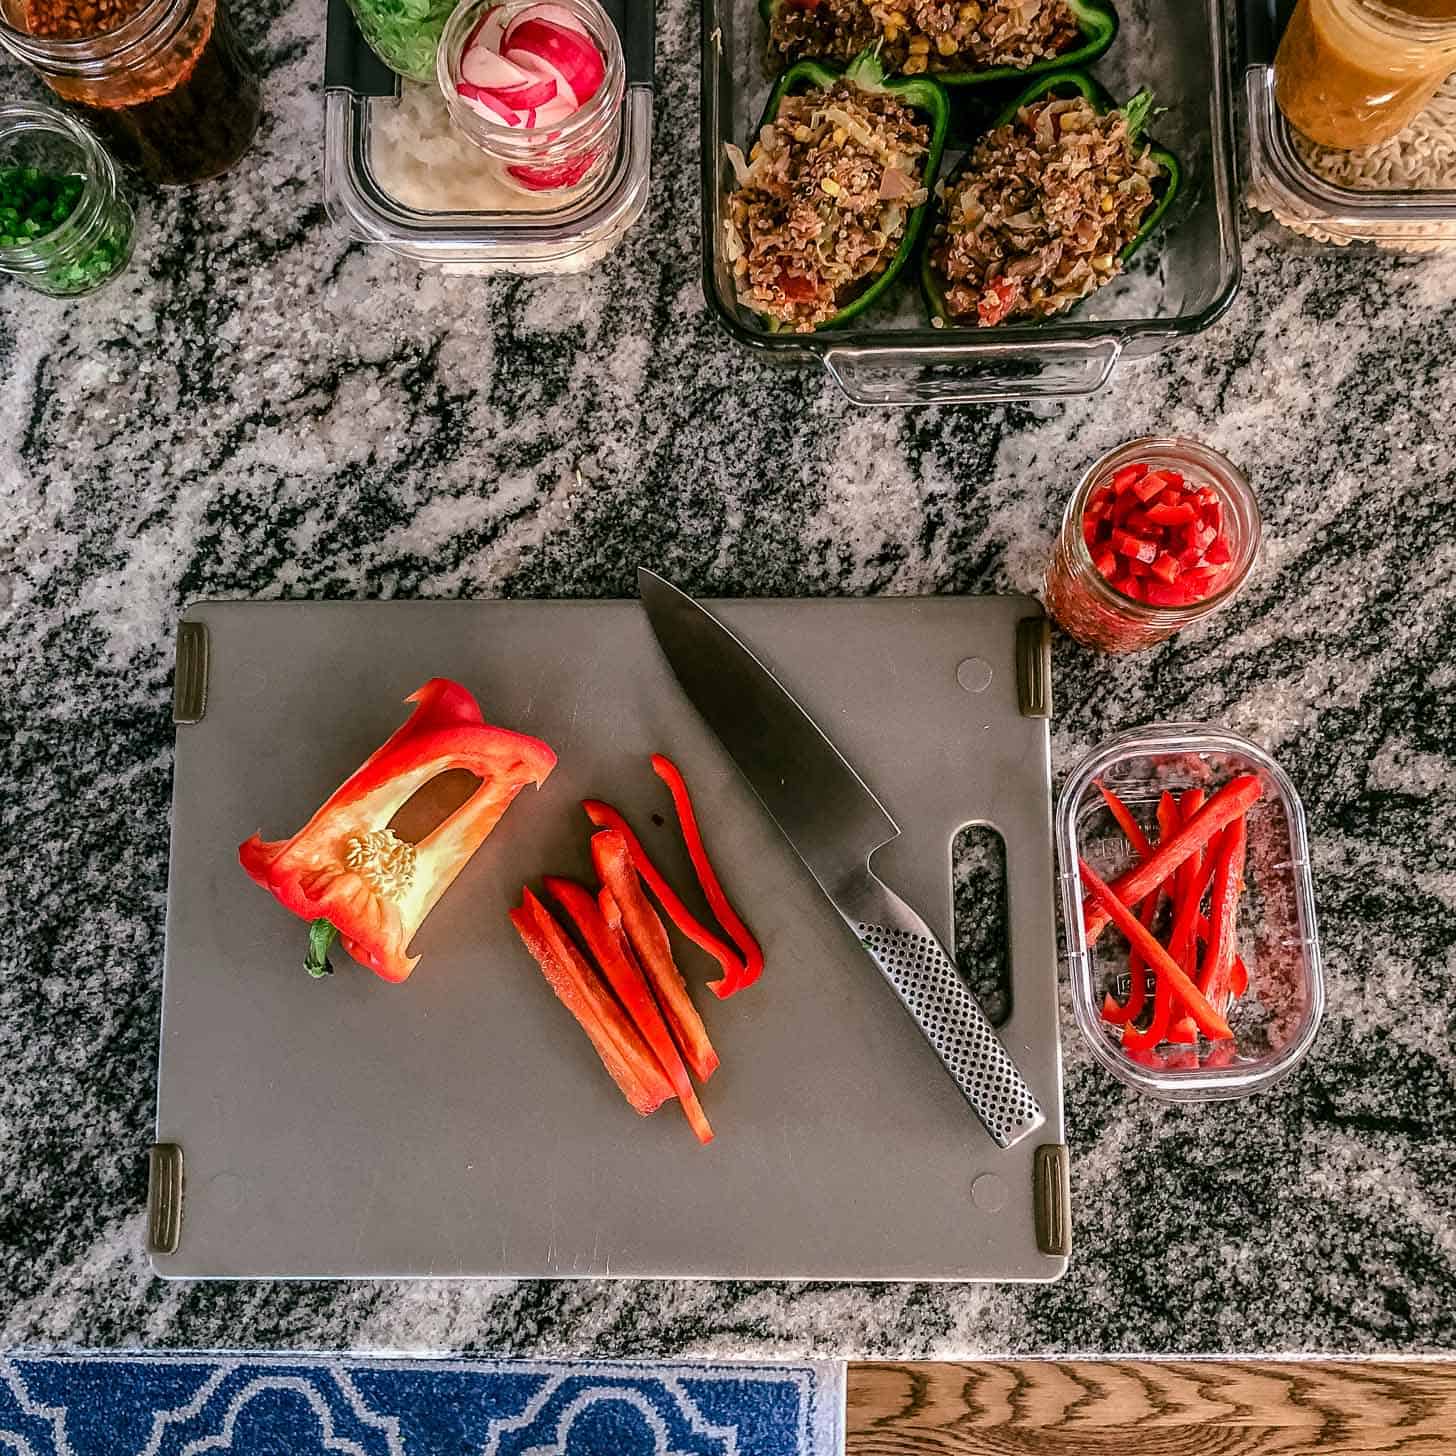 a cutting board with a knife and a red pepper